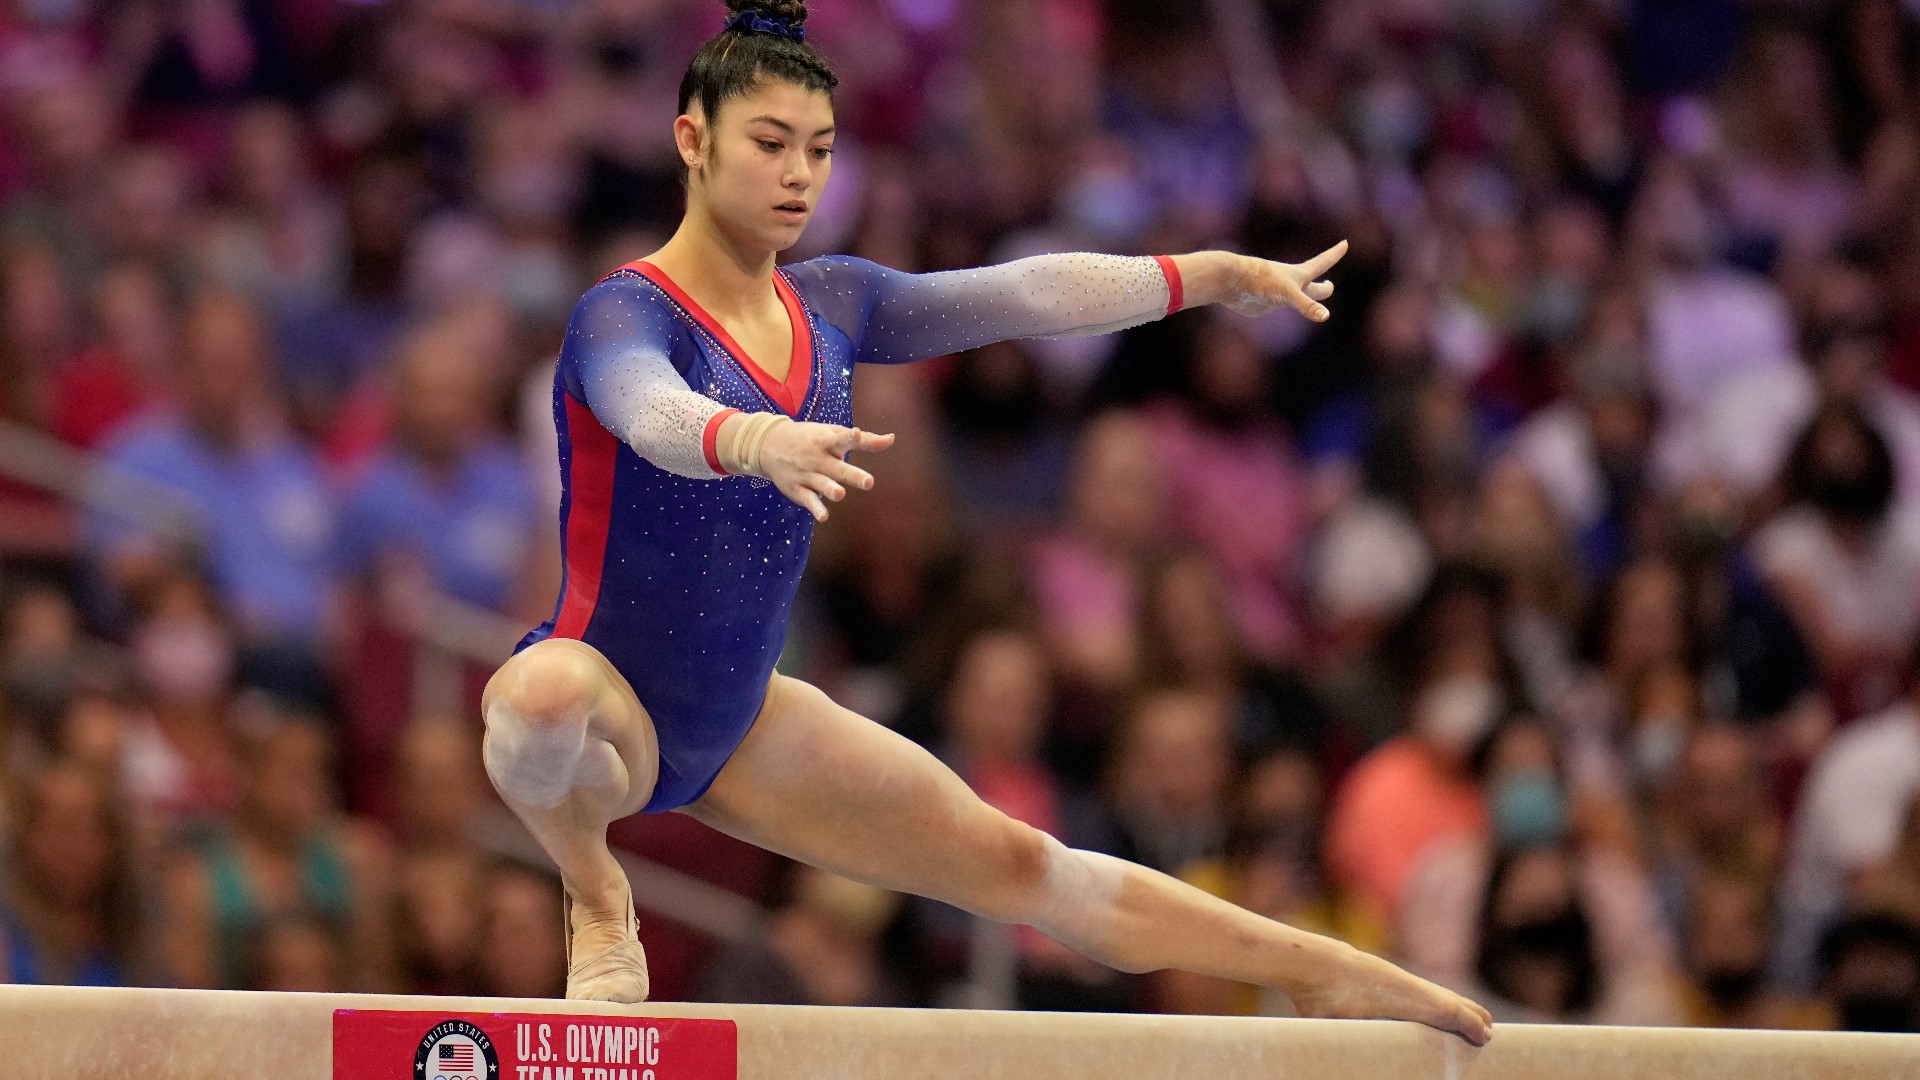 Kayla DiCello was part of a handful of athletes that competed at the Olympic trials for gymnastics in St. Louis, Missouri.